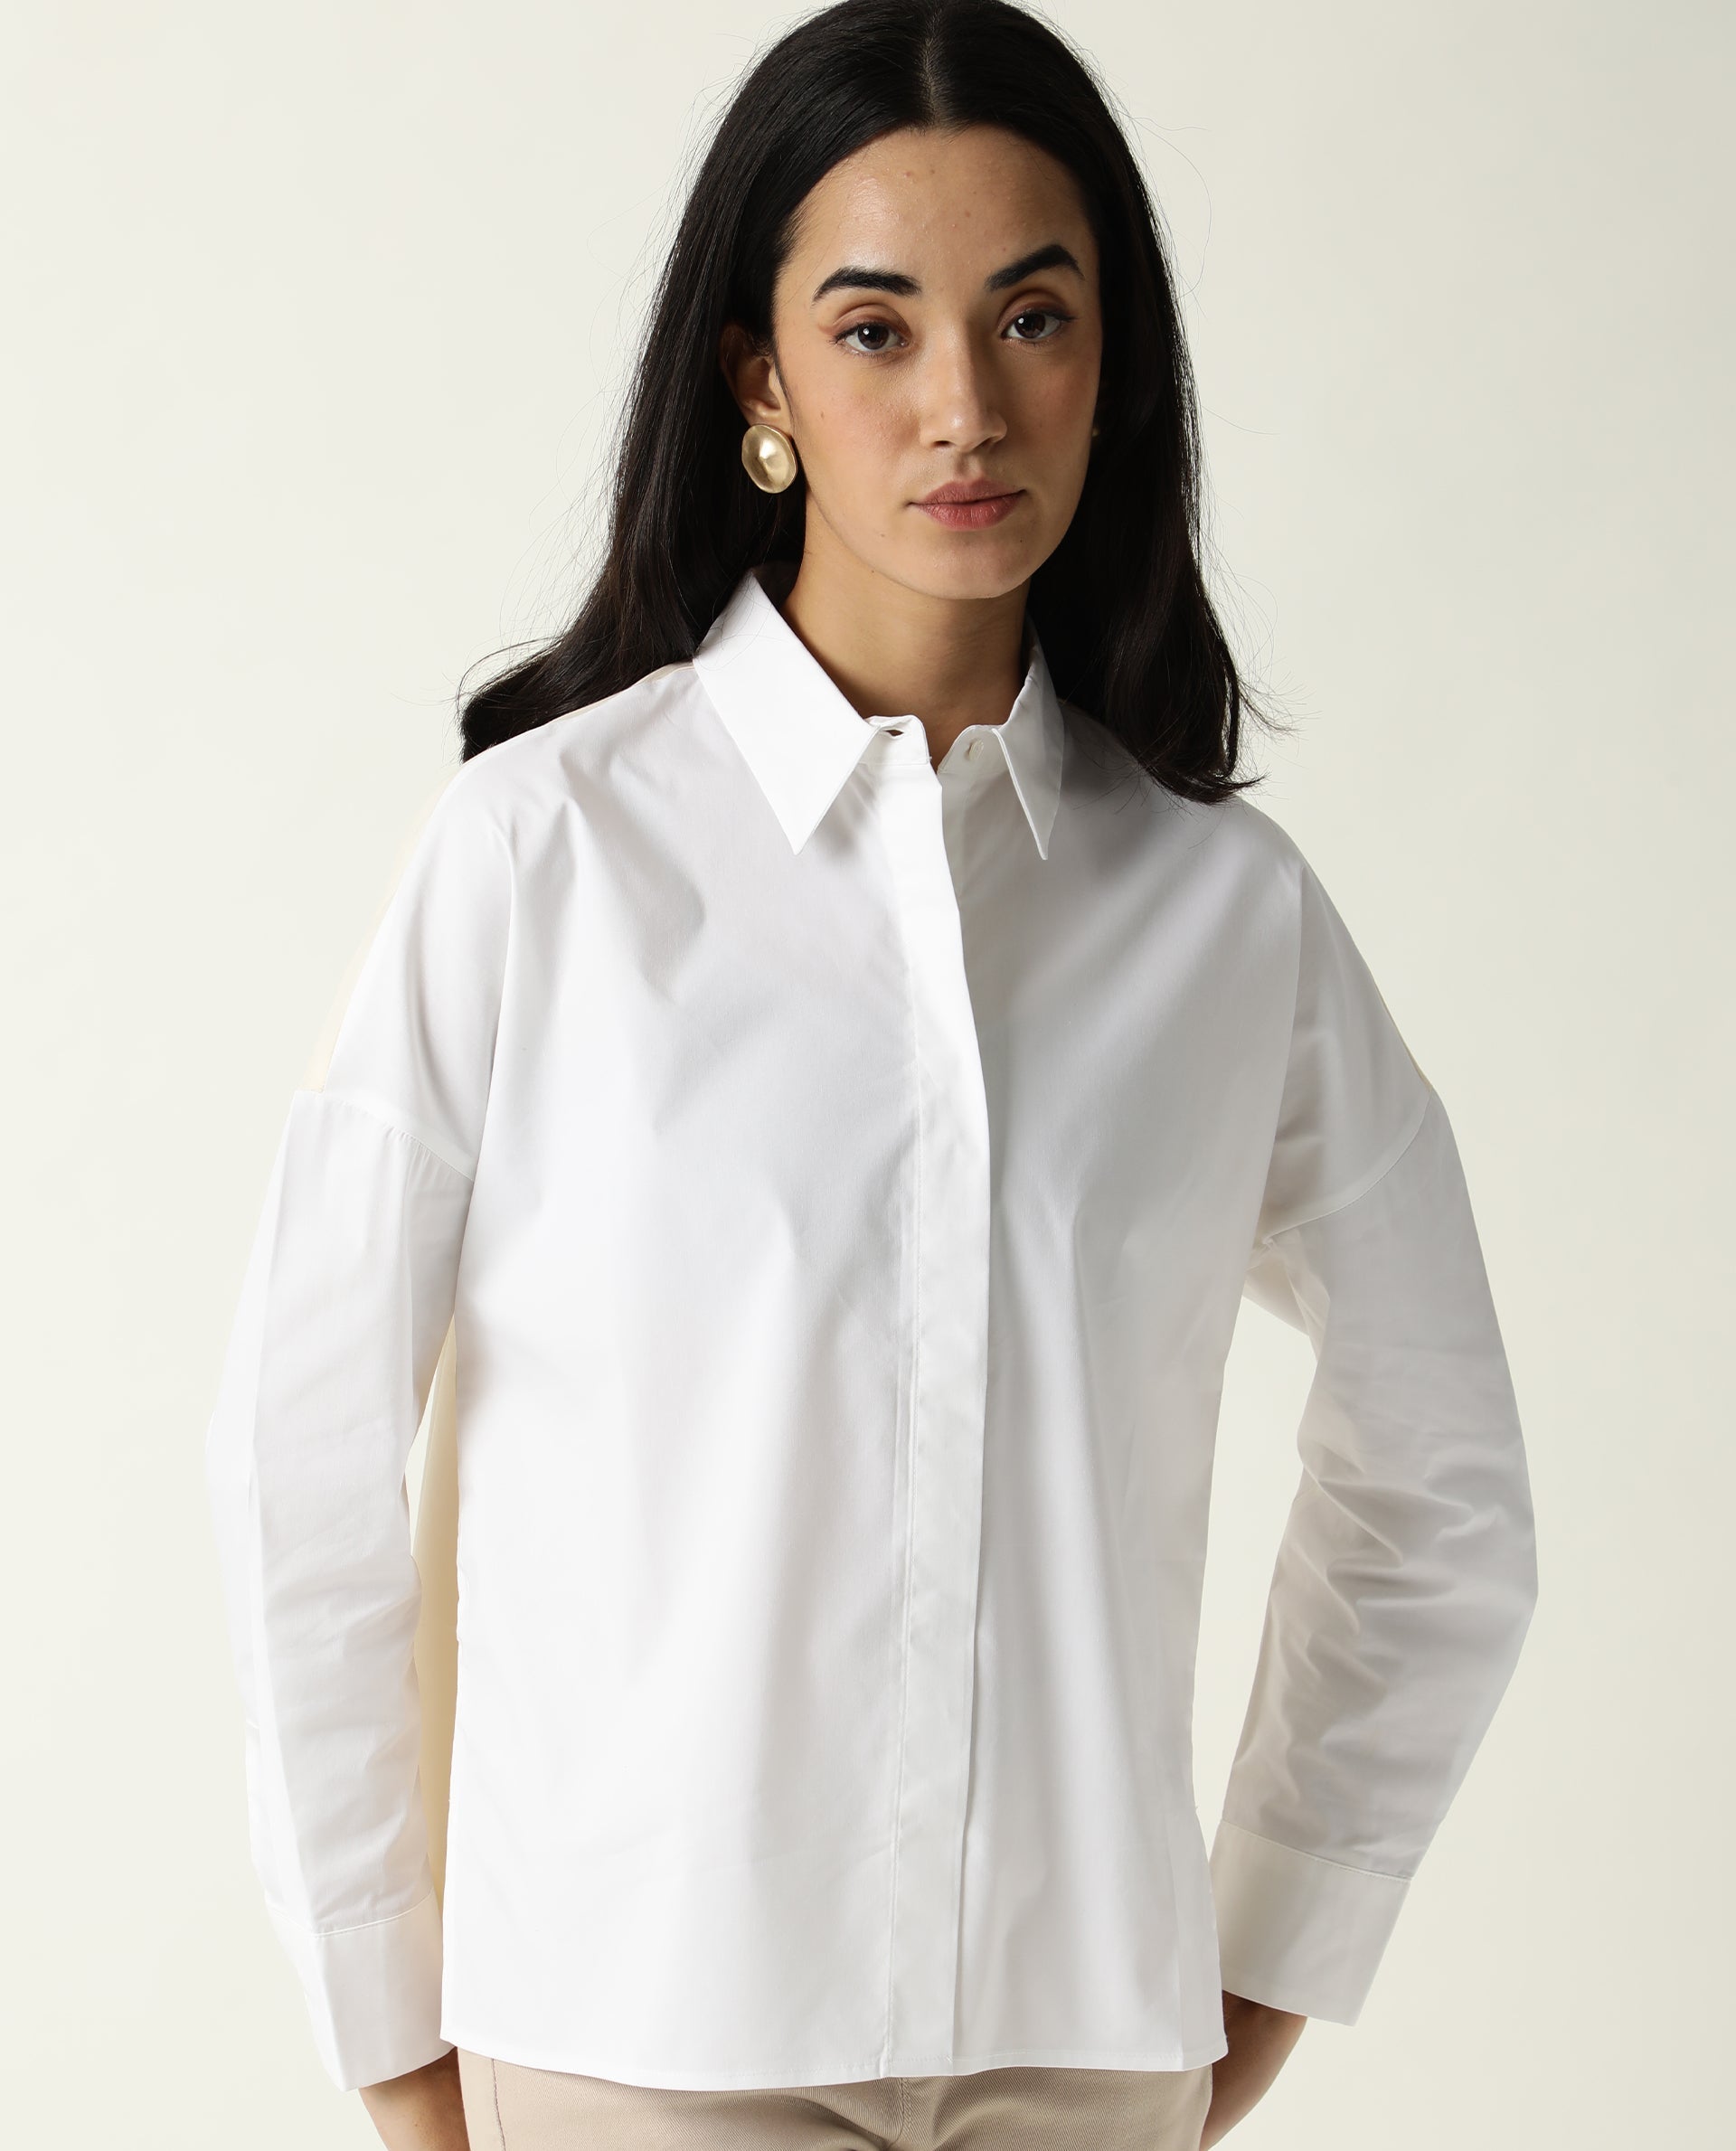 WOMENS NELLORE WHITE TOP Cotton Lycra FABRIC Regular FIT Full Sleeve Collared Neck